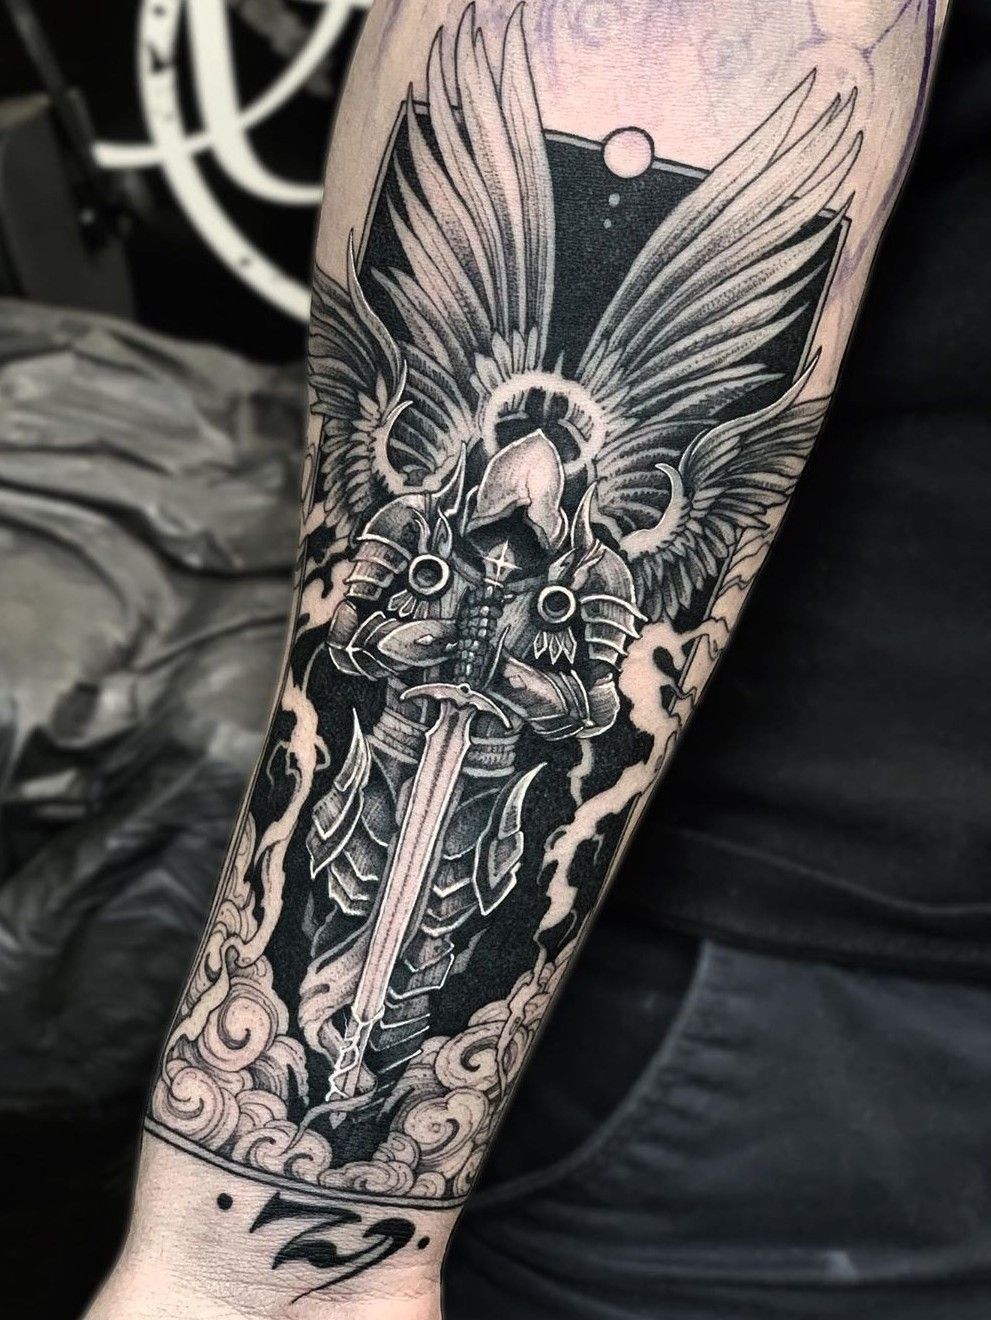 Micro-realistic Archangel Michael tattoo on the